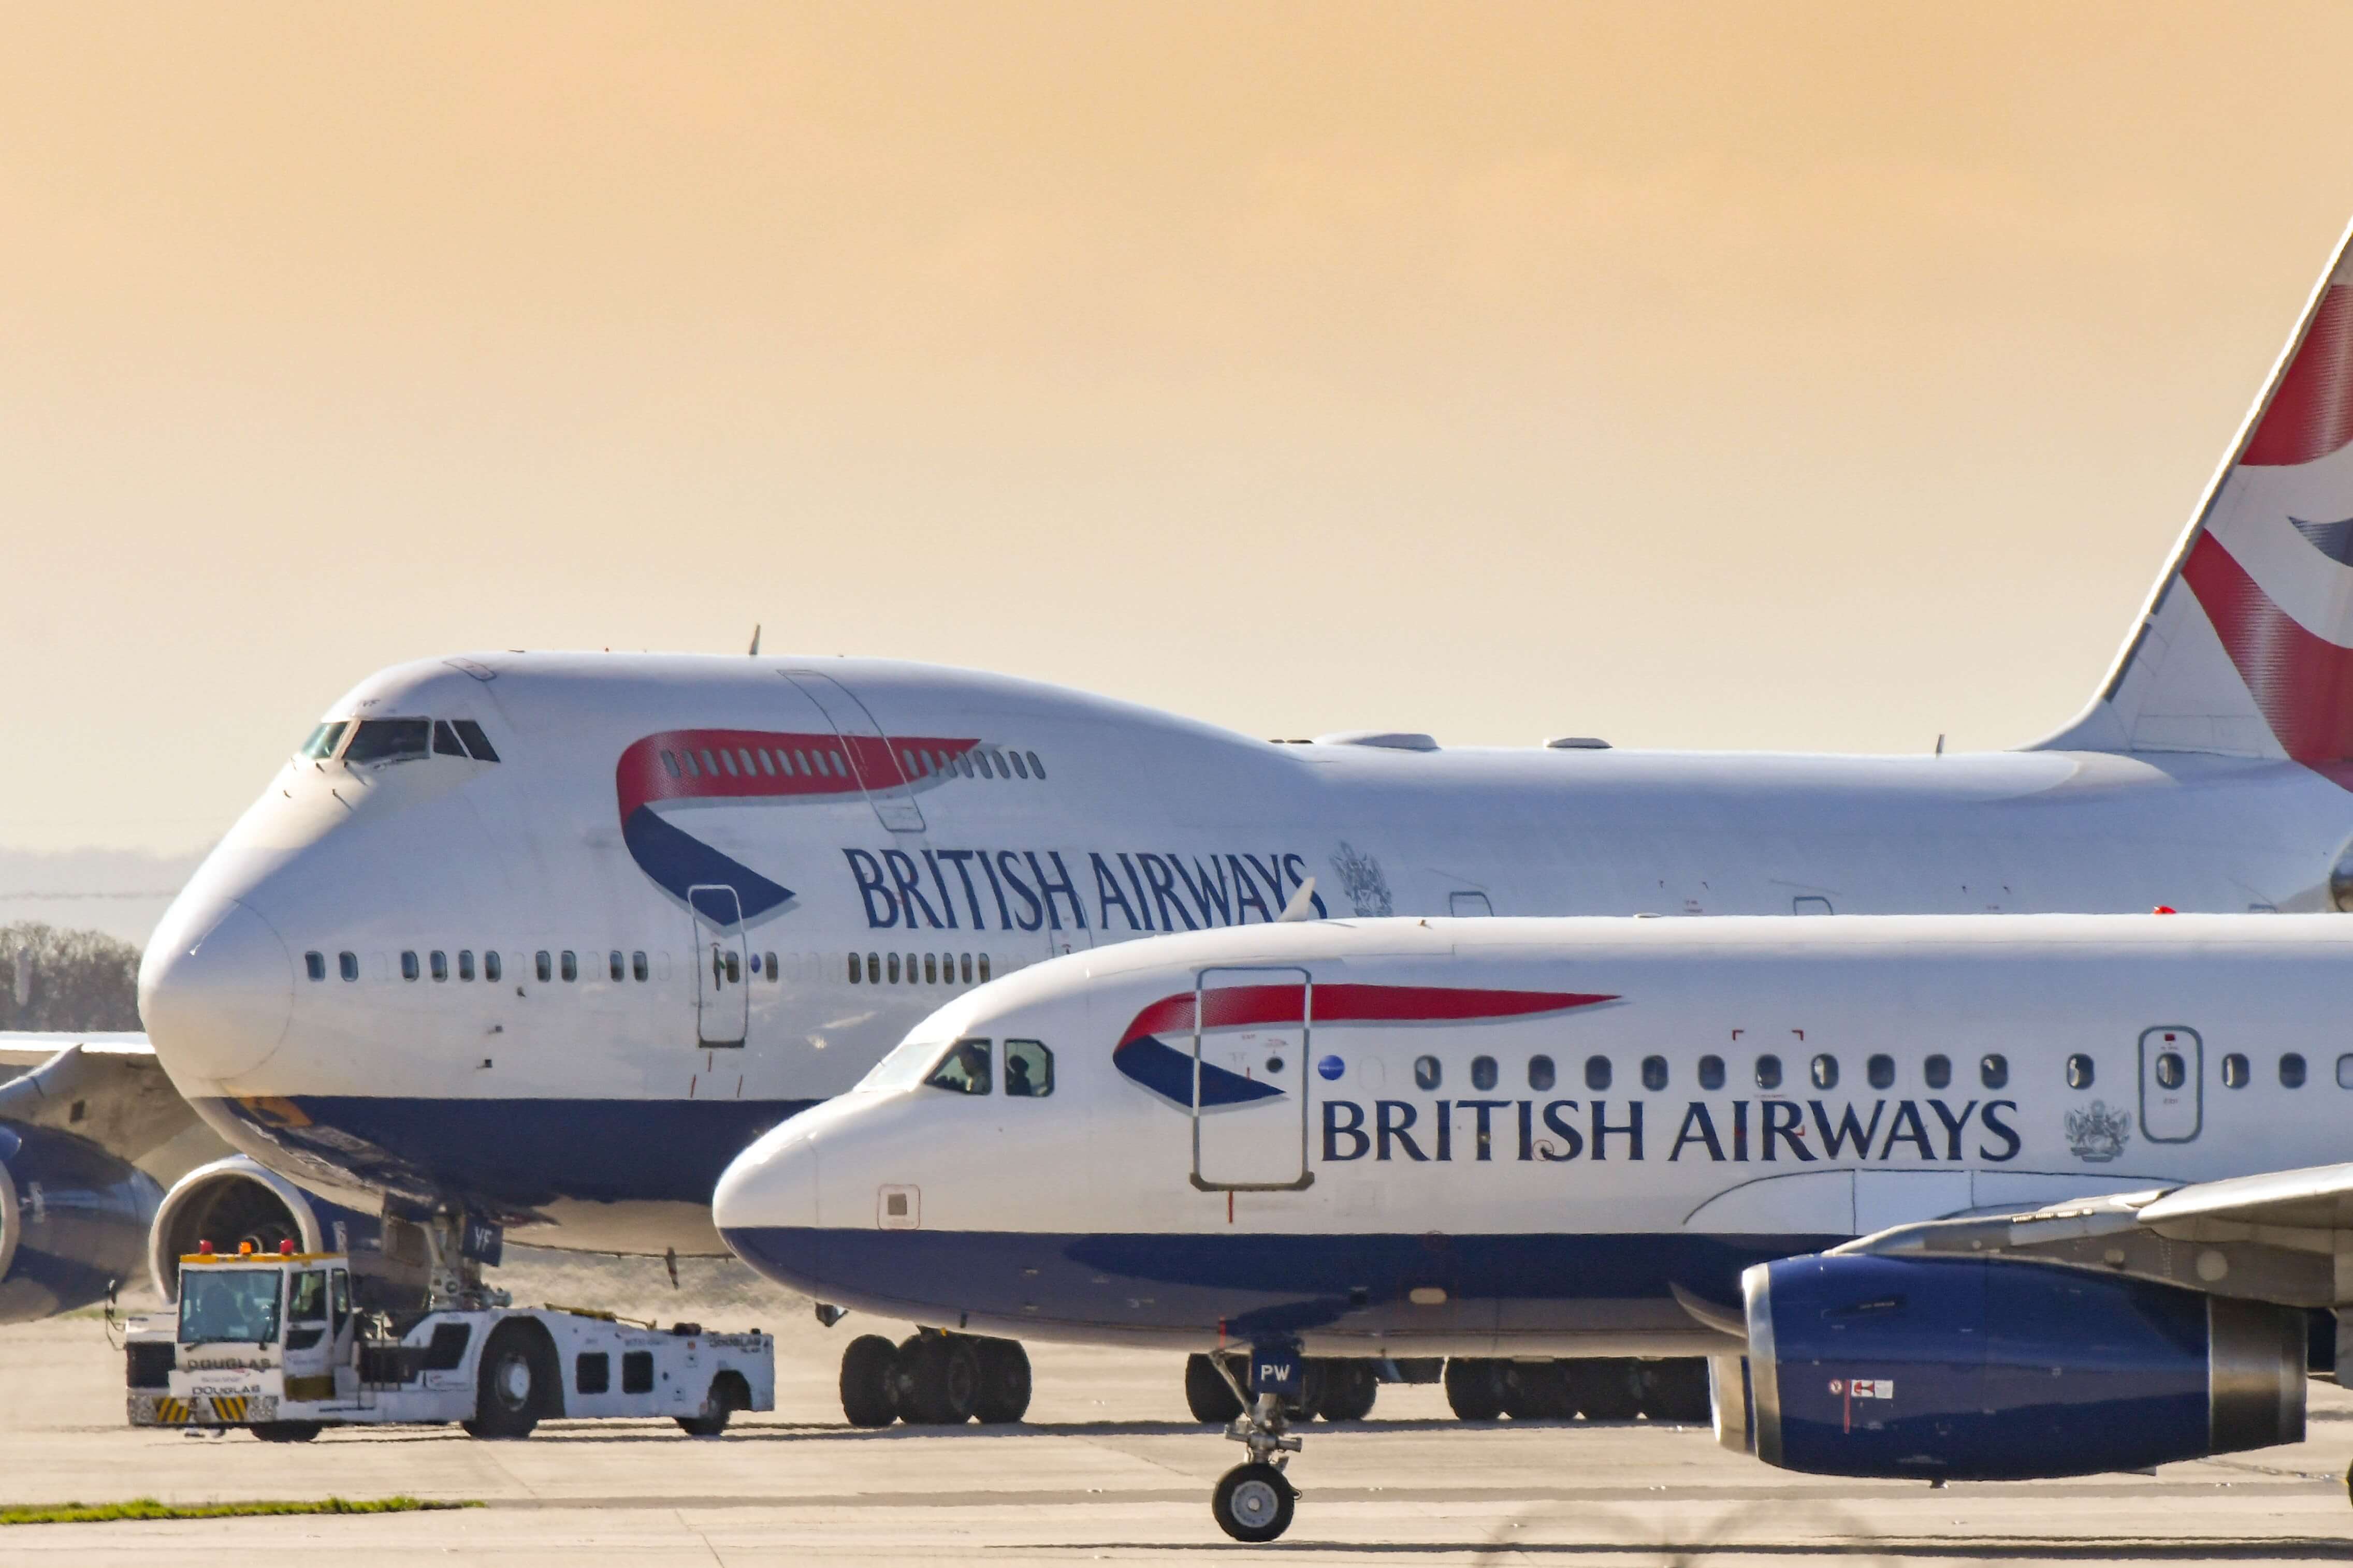 British Airways Airbus A319 jet taxiing past one of the airline's